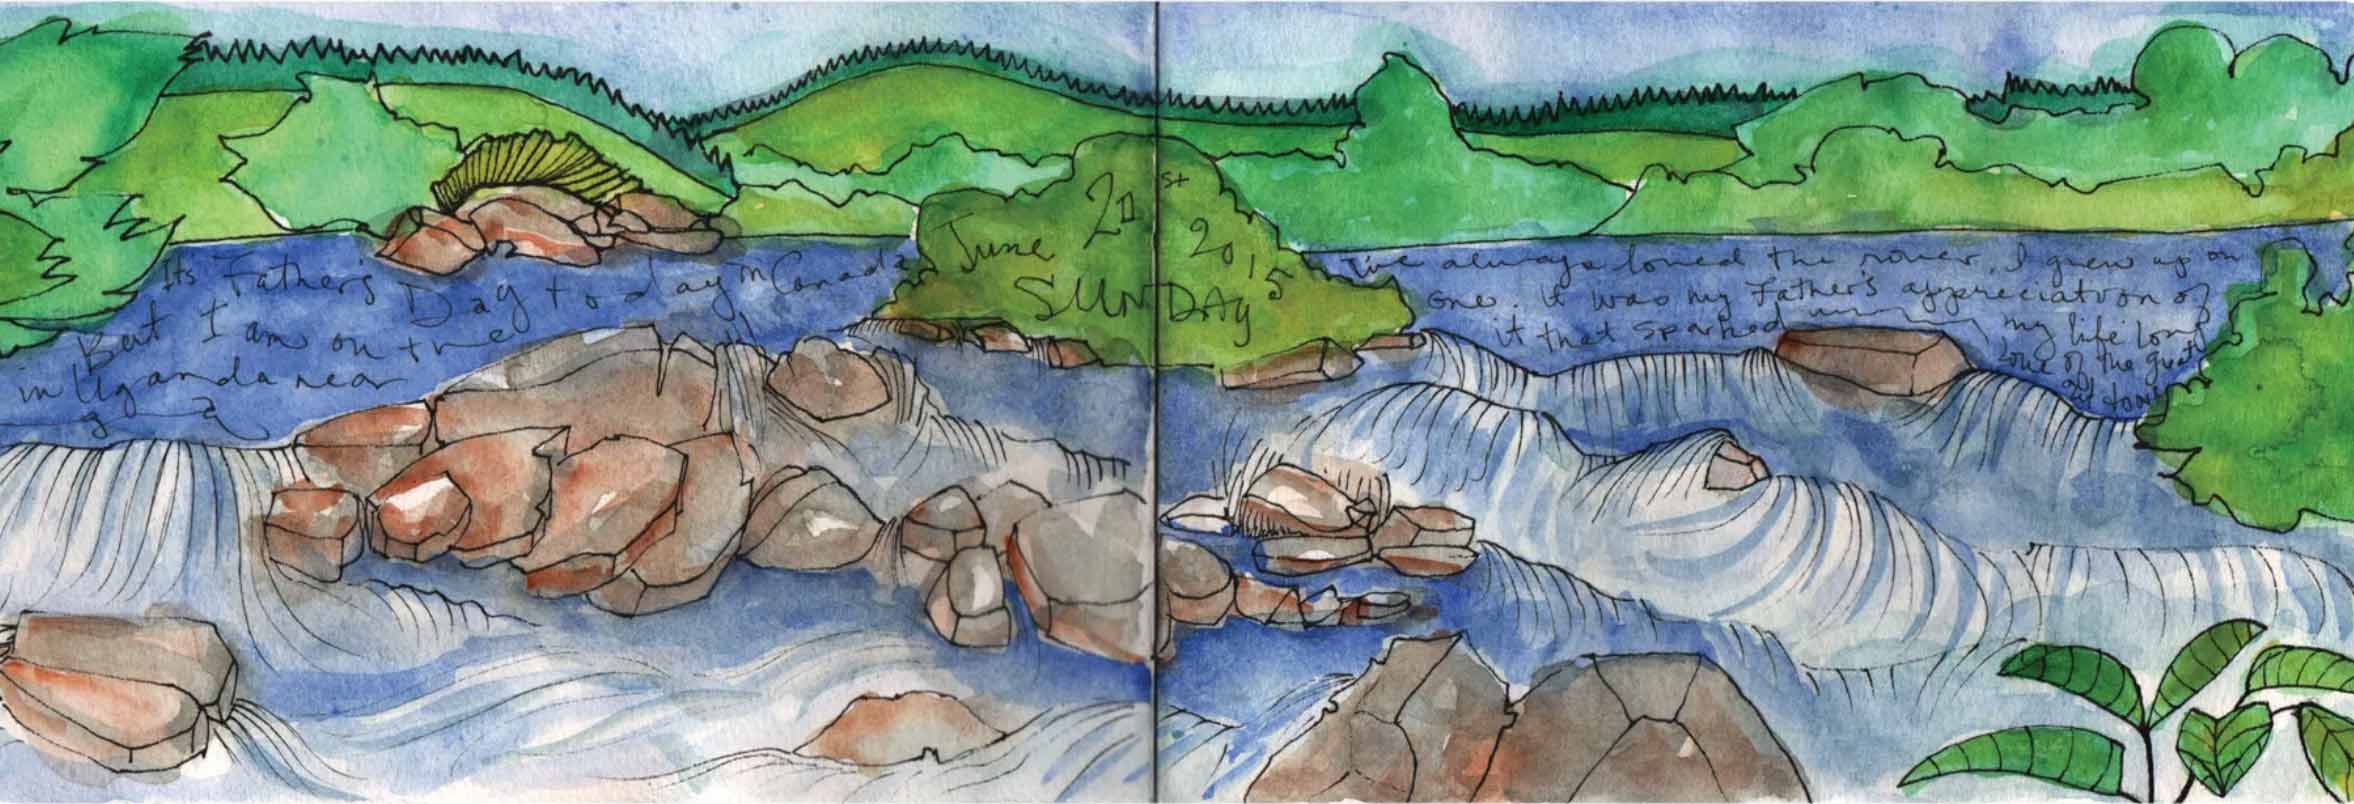 An ink and watercolour illustration of the Nile river in Uganda by Kathryn Ann Jankowski